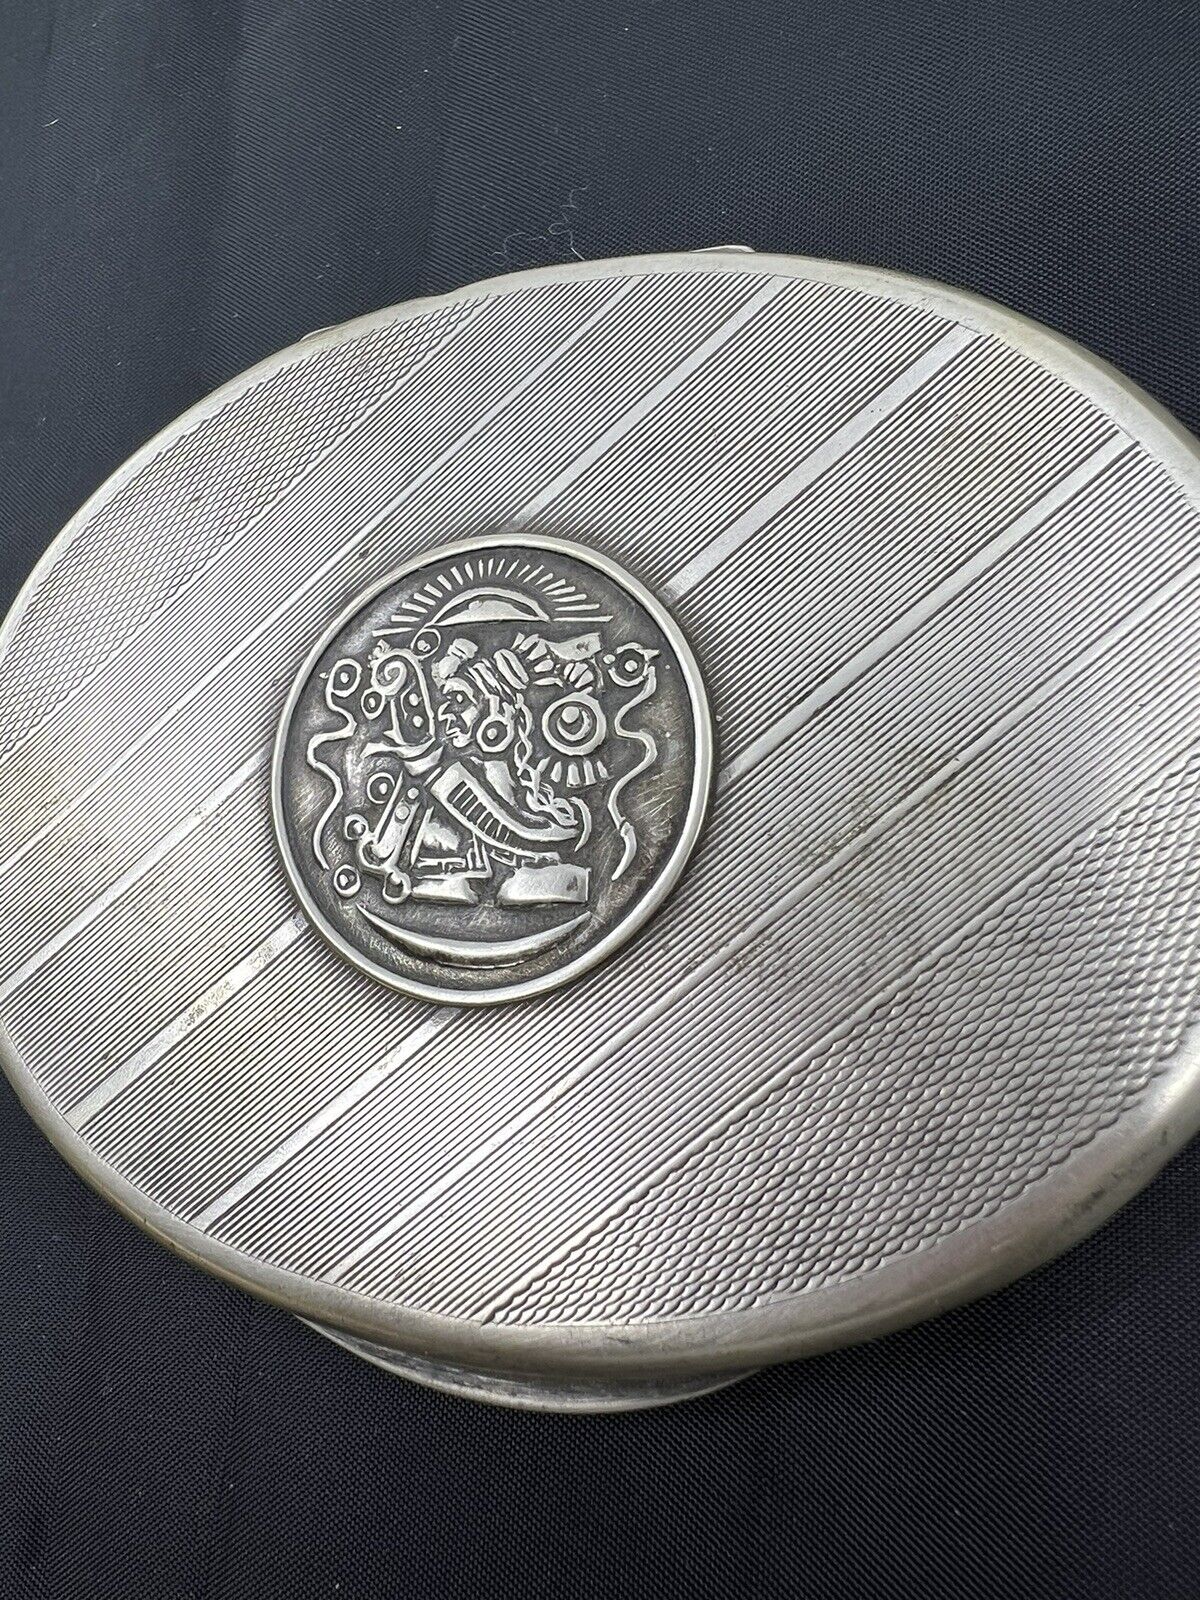 VERY RARE VINTAGE STERLING SILVER G LAFFI POWDER COMPACT STERLING COMPACT